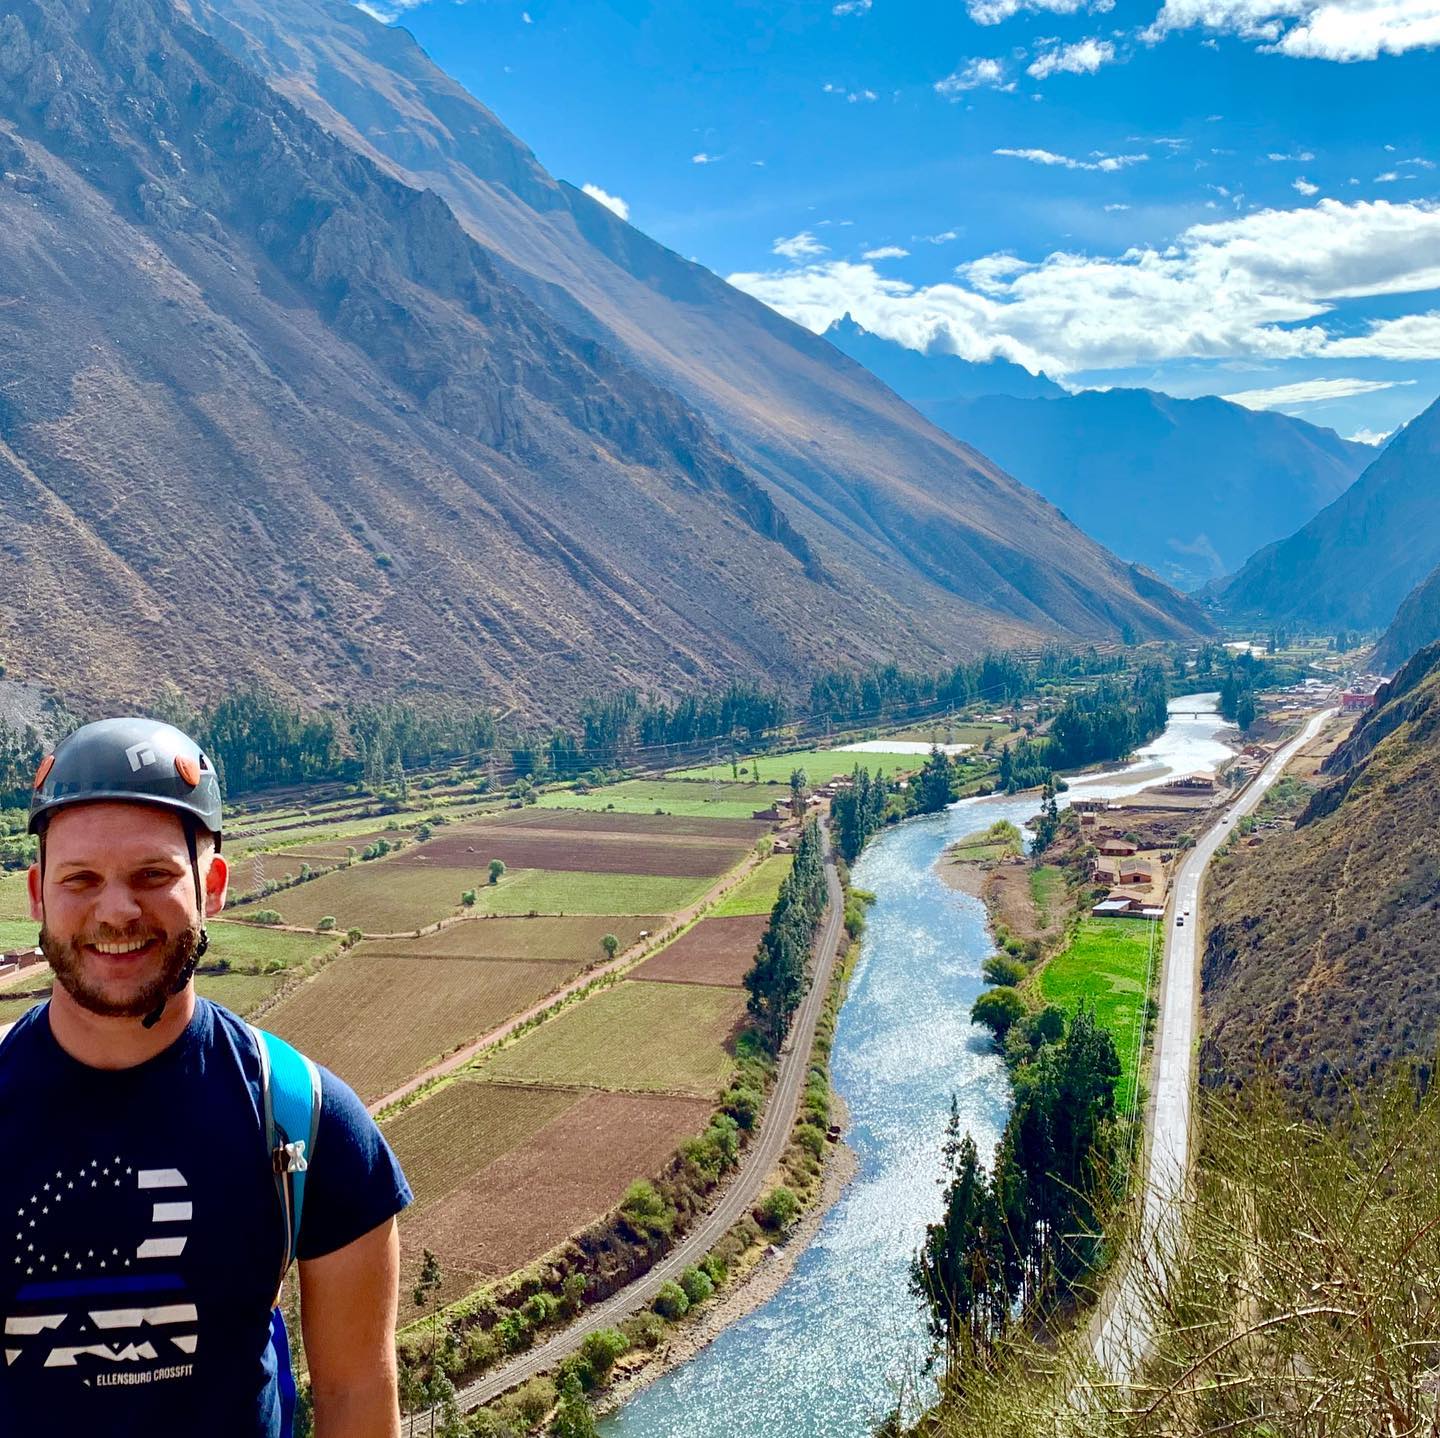 Peru Day 1: might as well rock climb my way to lunch in a cliff kitchen. Cliff lodge is seen in picture to the right. Great toilet, too. We zip lined back down on 6 lines.